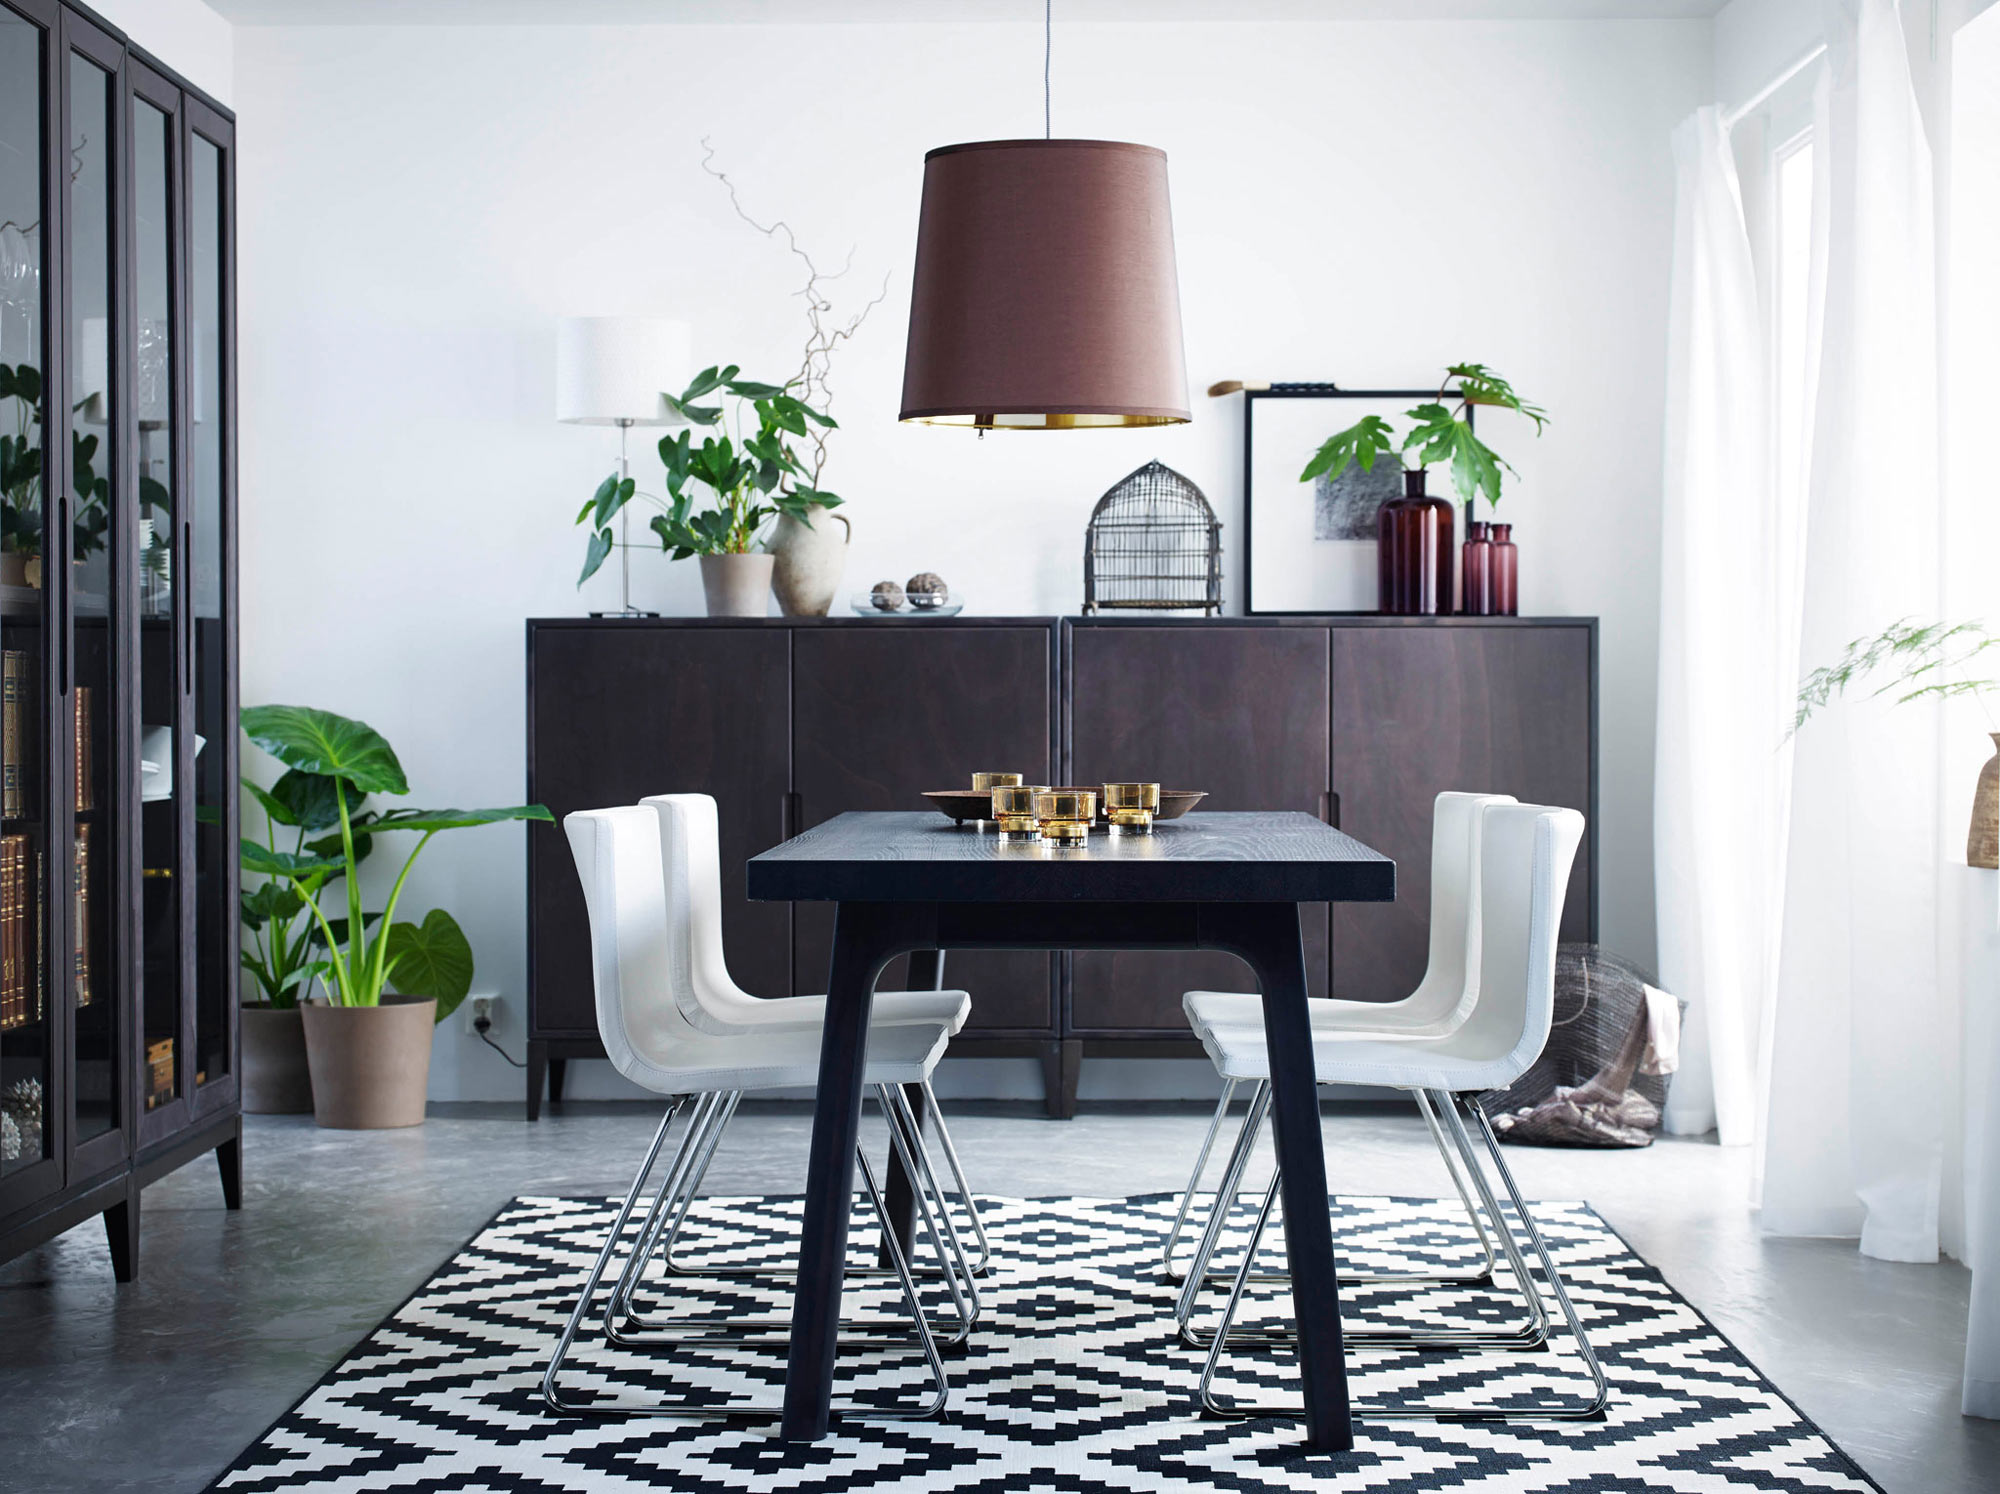 Choosing the right dining table rug - IKEA